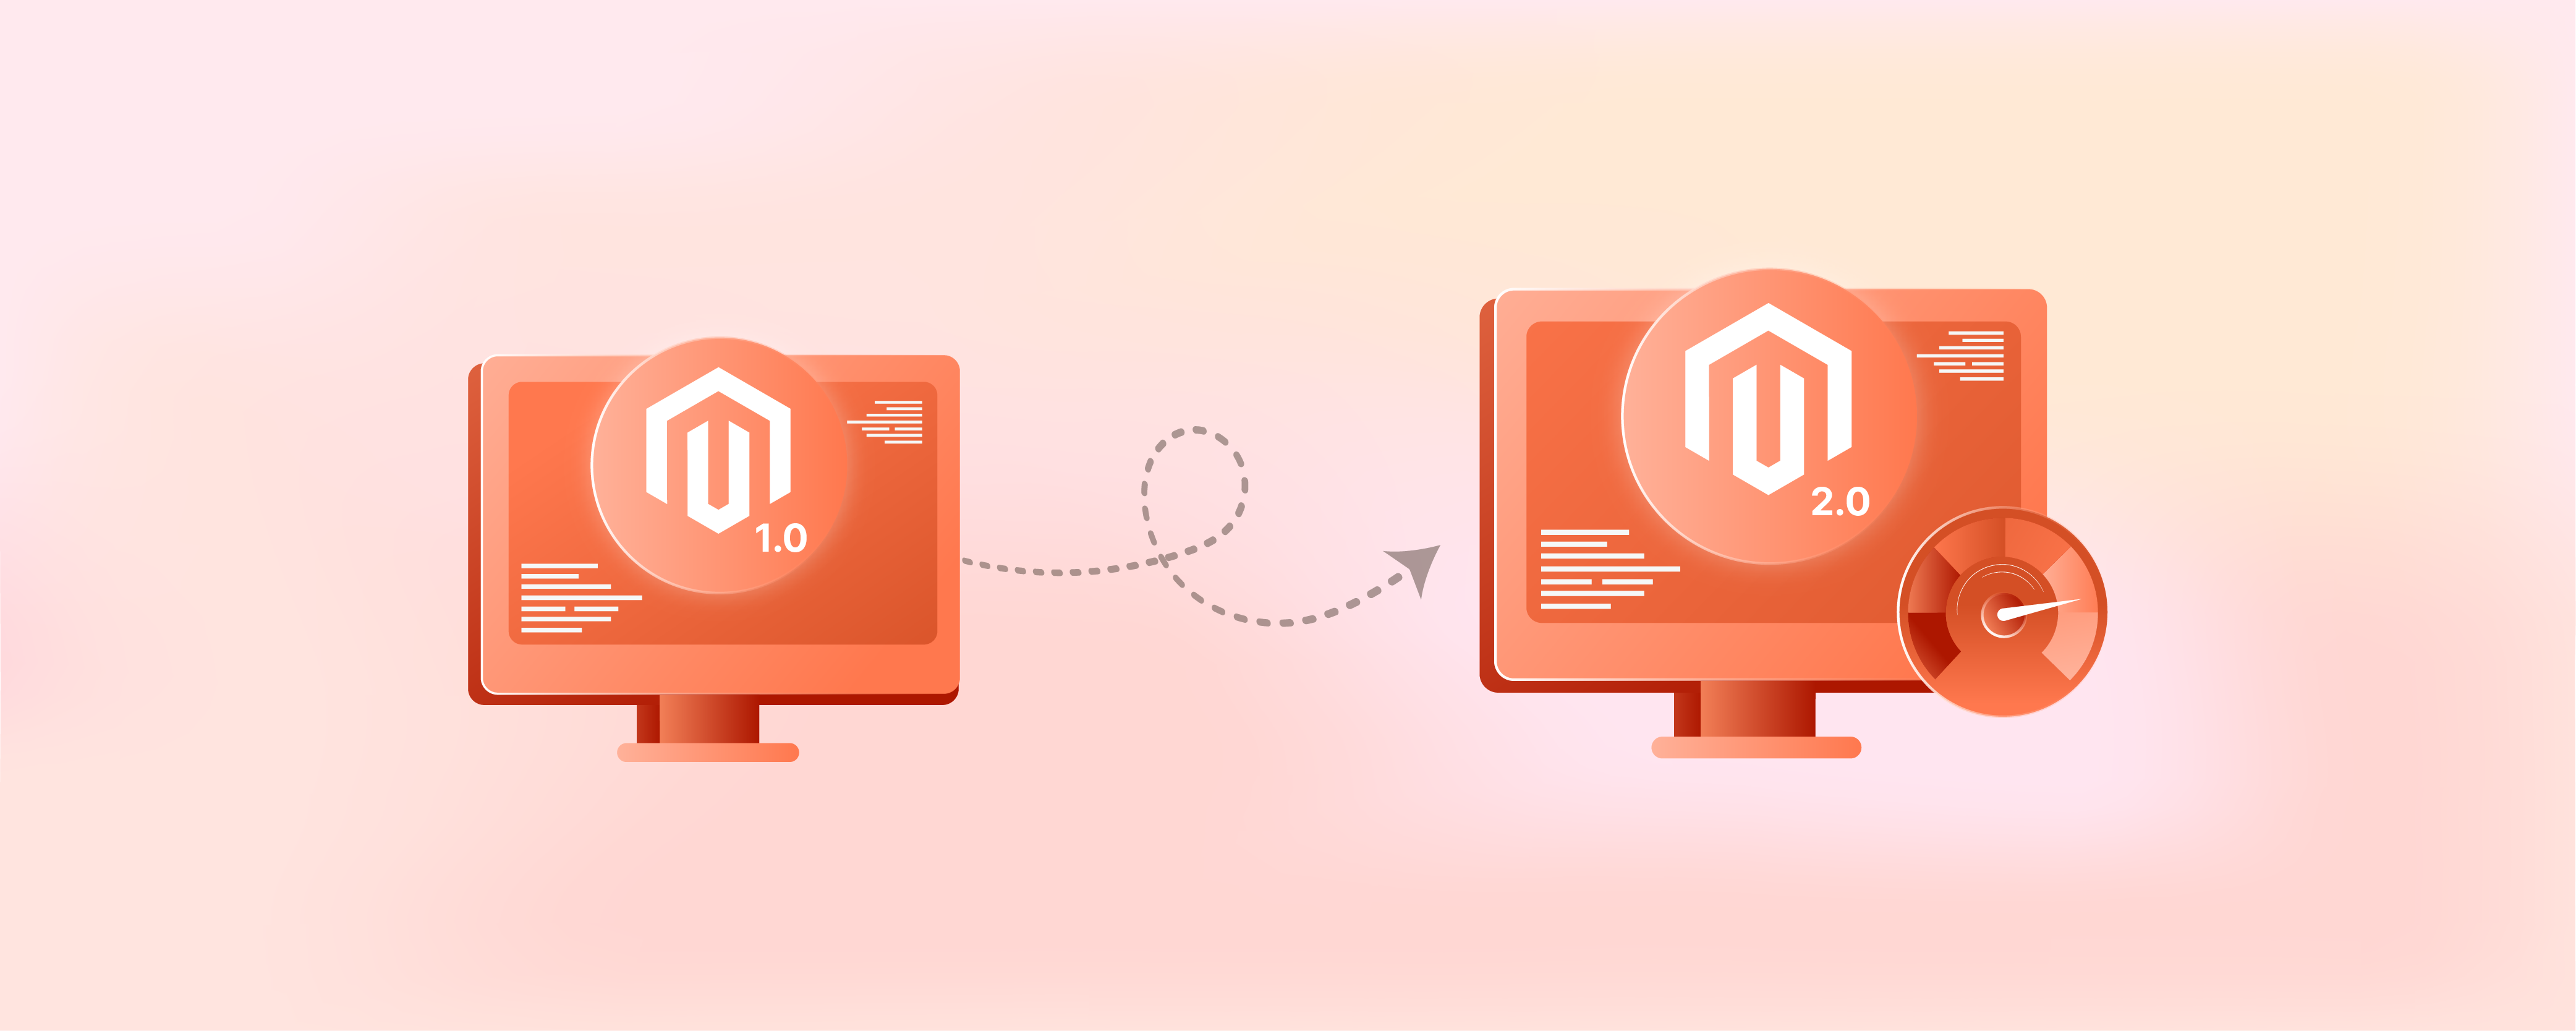 Best Magento 2 Web Hosting: Why Upgrade from Magento 1 to Magento 2